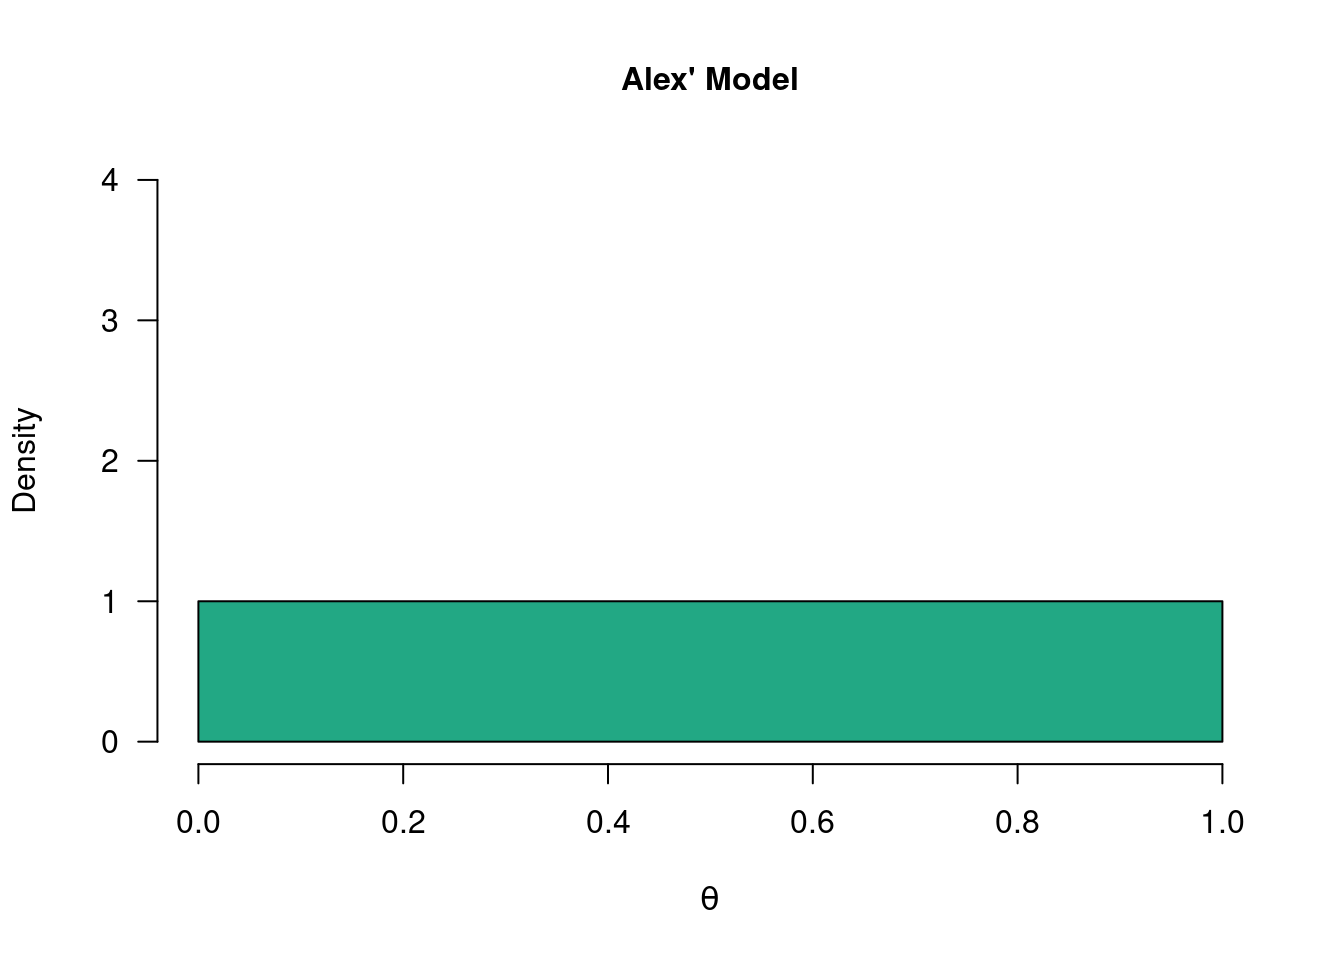 The so-called "uninformed model". Alex wants to keep an open mind about the values of theta and considers each value equally plausible. The uniform prior distribution below reflects this.